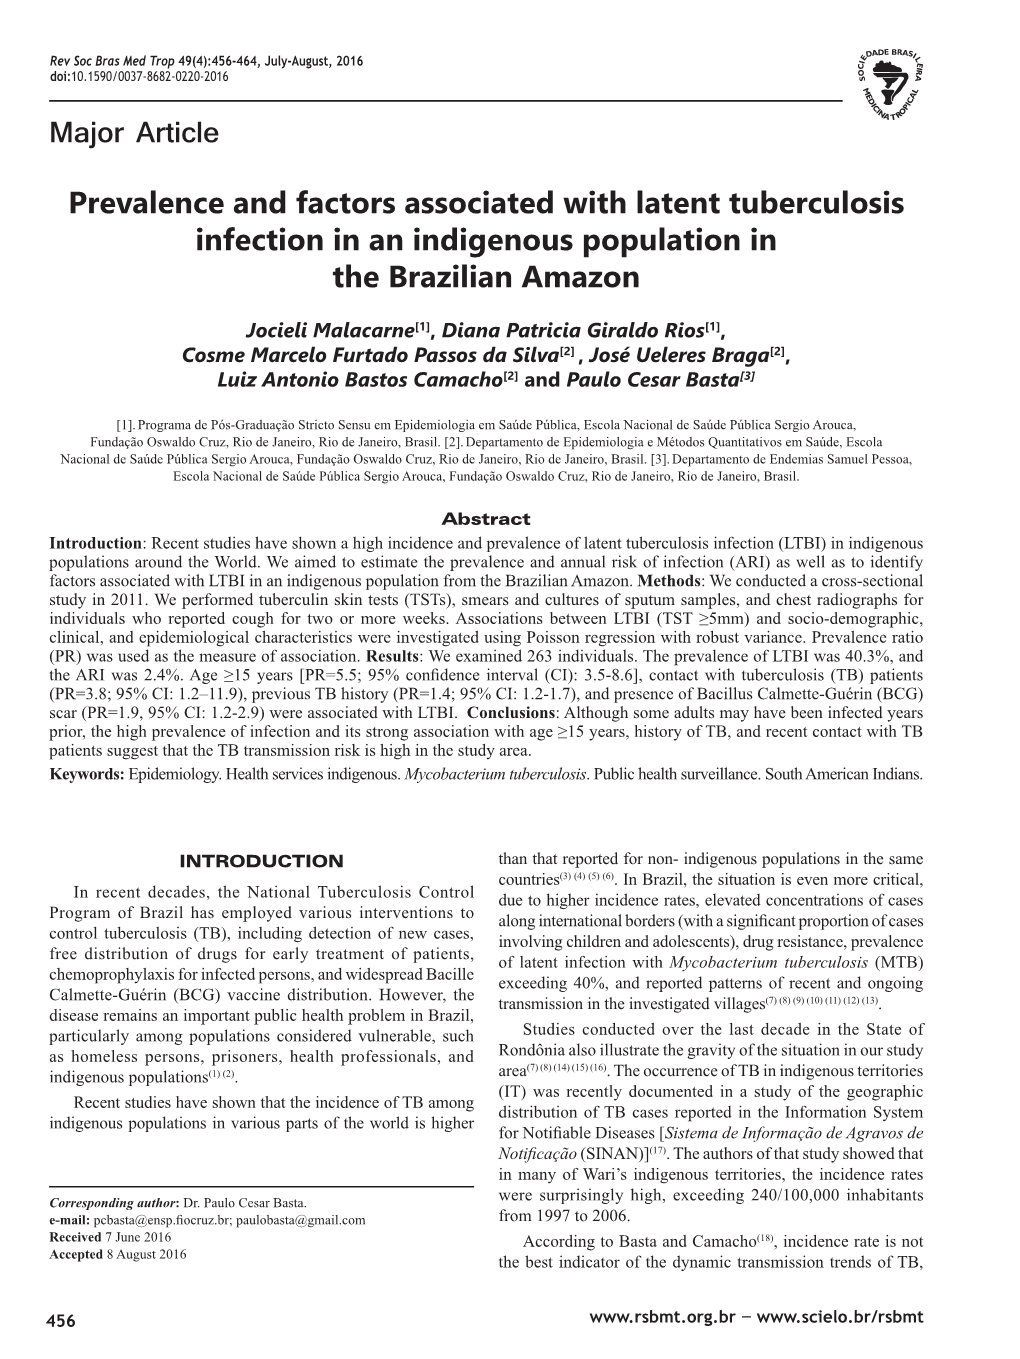 Prevalence and Factors Associated with Latent Tuberculosis Infection in an Indigenous Population in the Brazilian Amazon